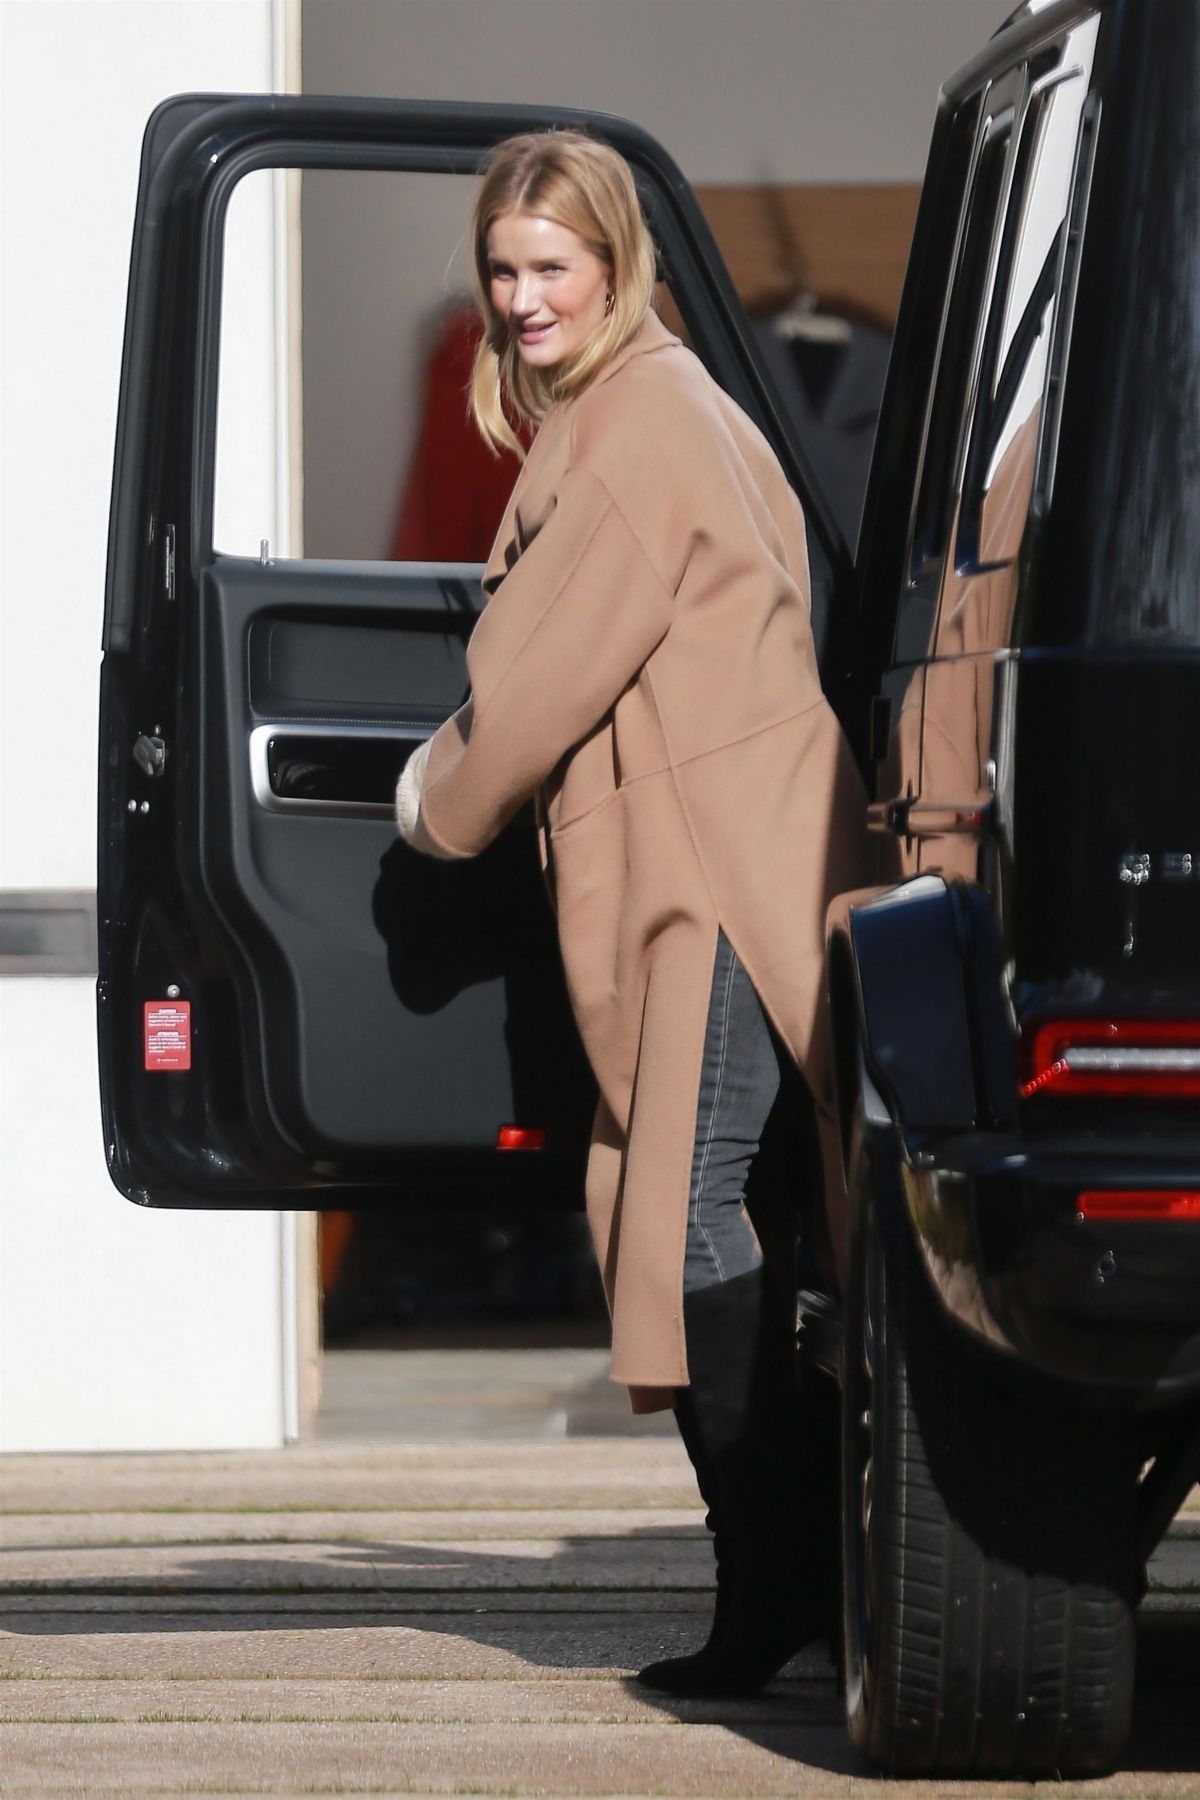 rosie-huntington-whiteley-out-in-beverly-hills-02-21-2019-3.jpg